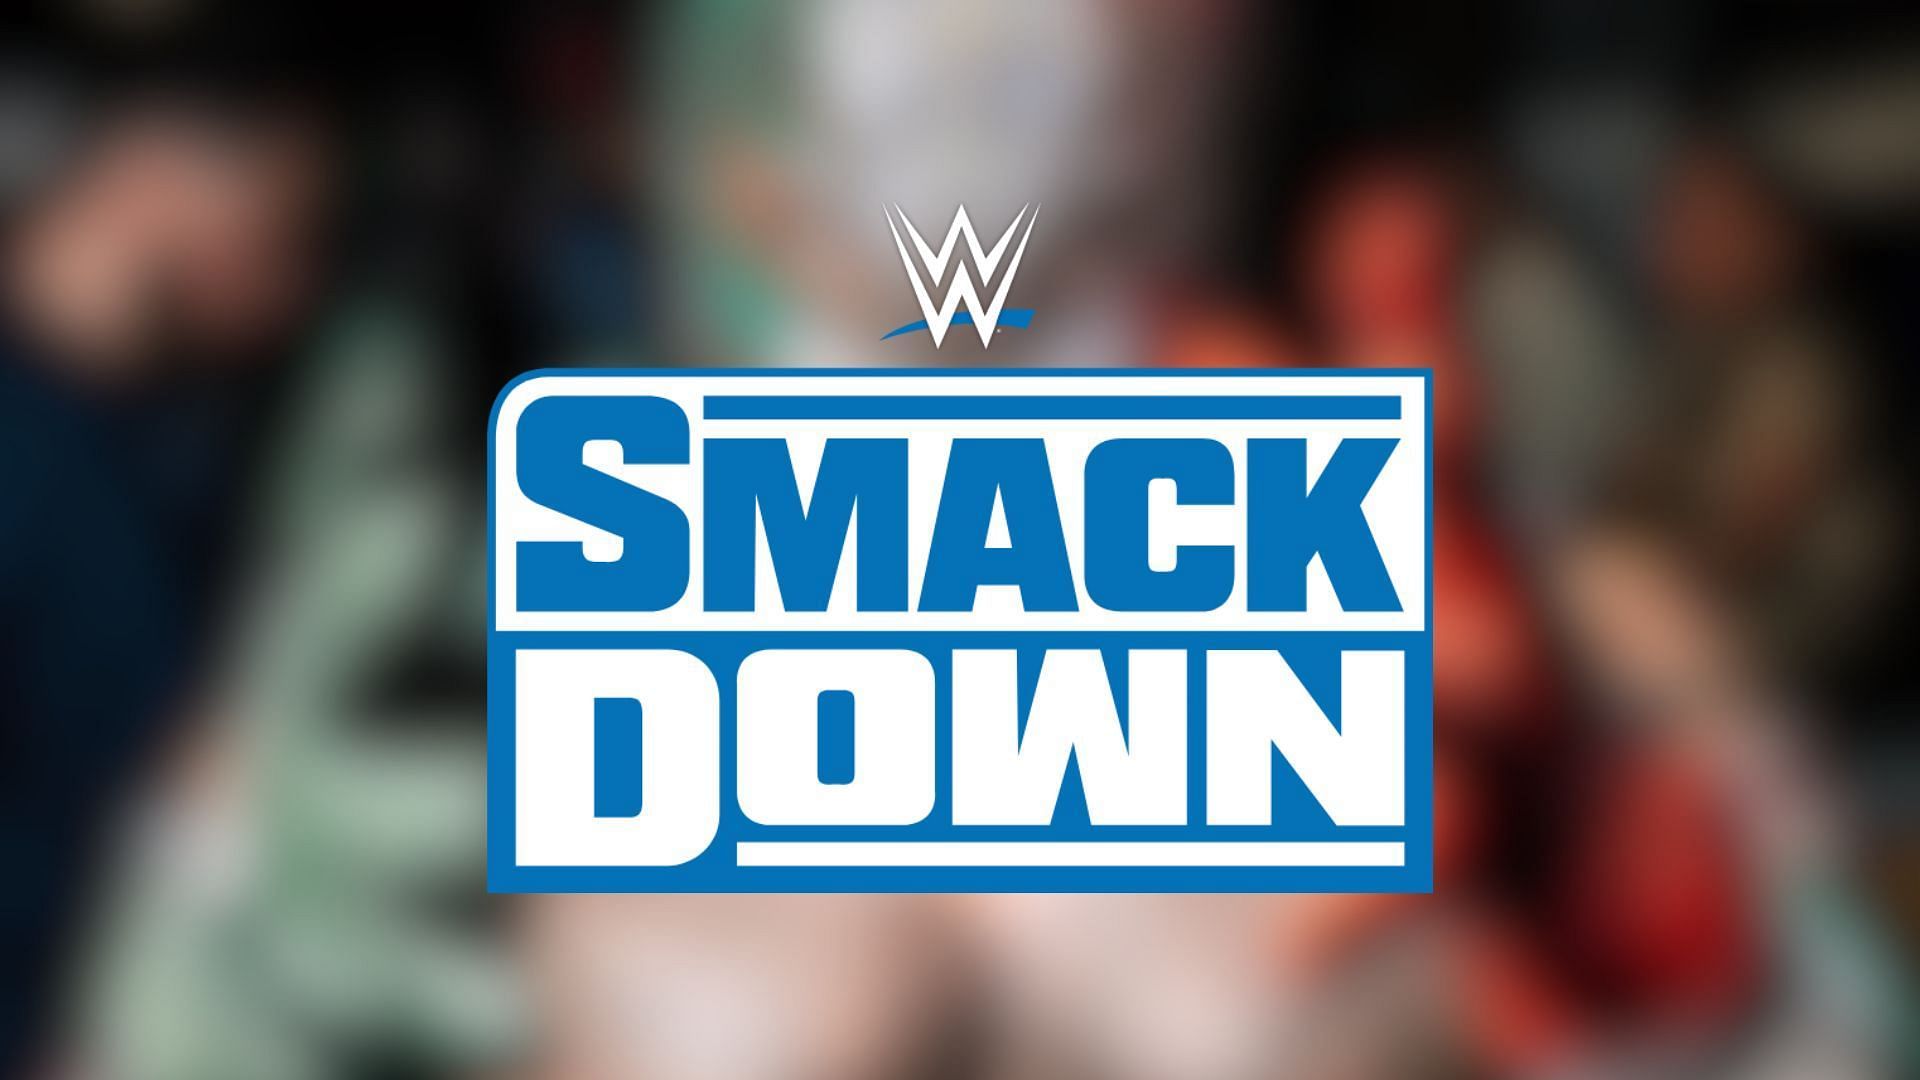 A handful of WWE Superstars are closely associated with the SmackDown brand...